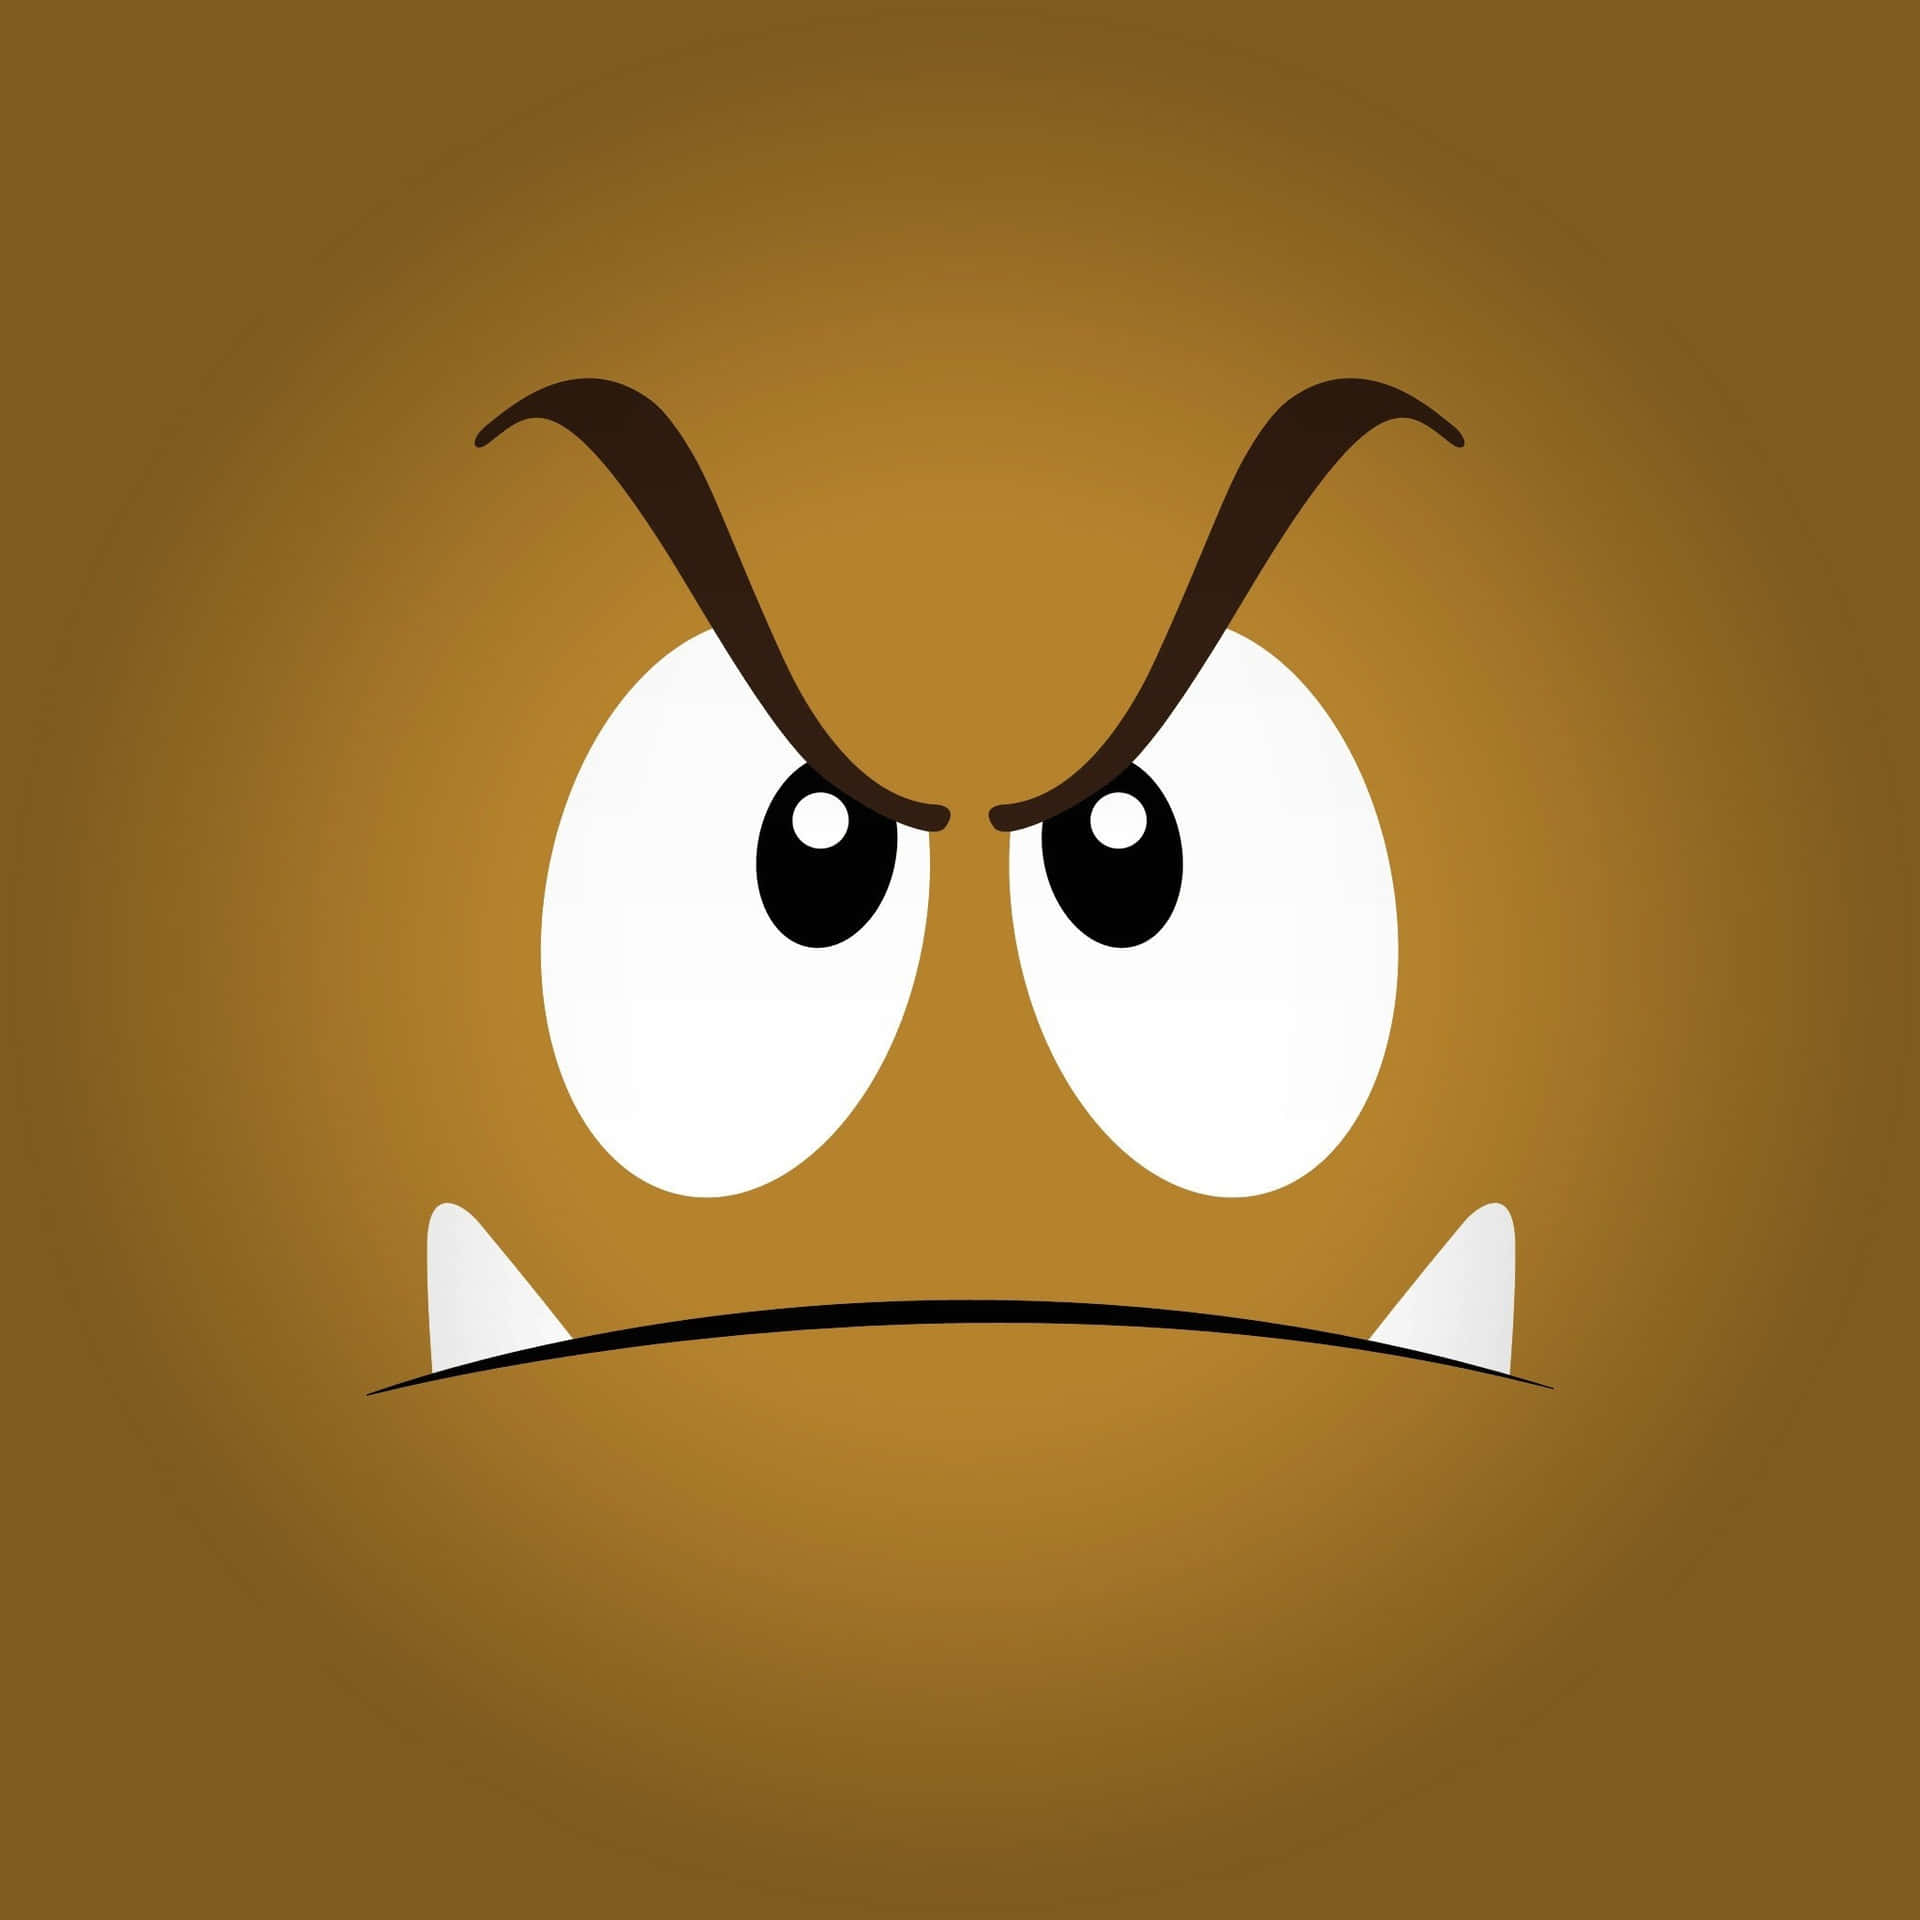 A Goomba from the popular game series, Super Mario Brothers, on a colorful, abstract background. Wallpaper